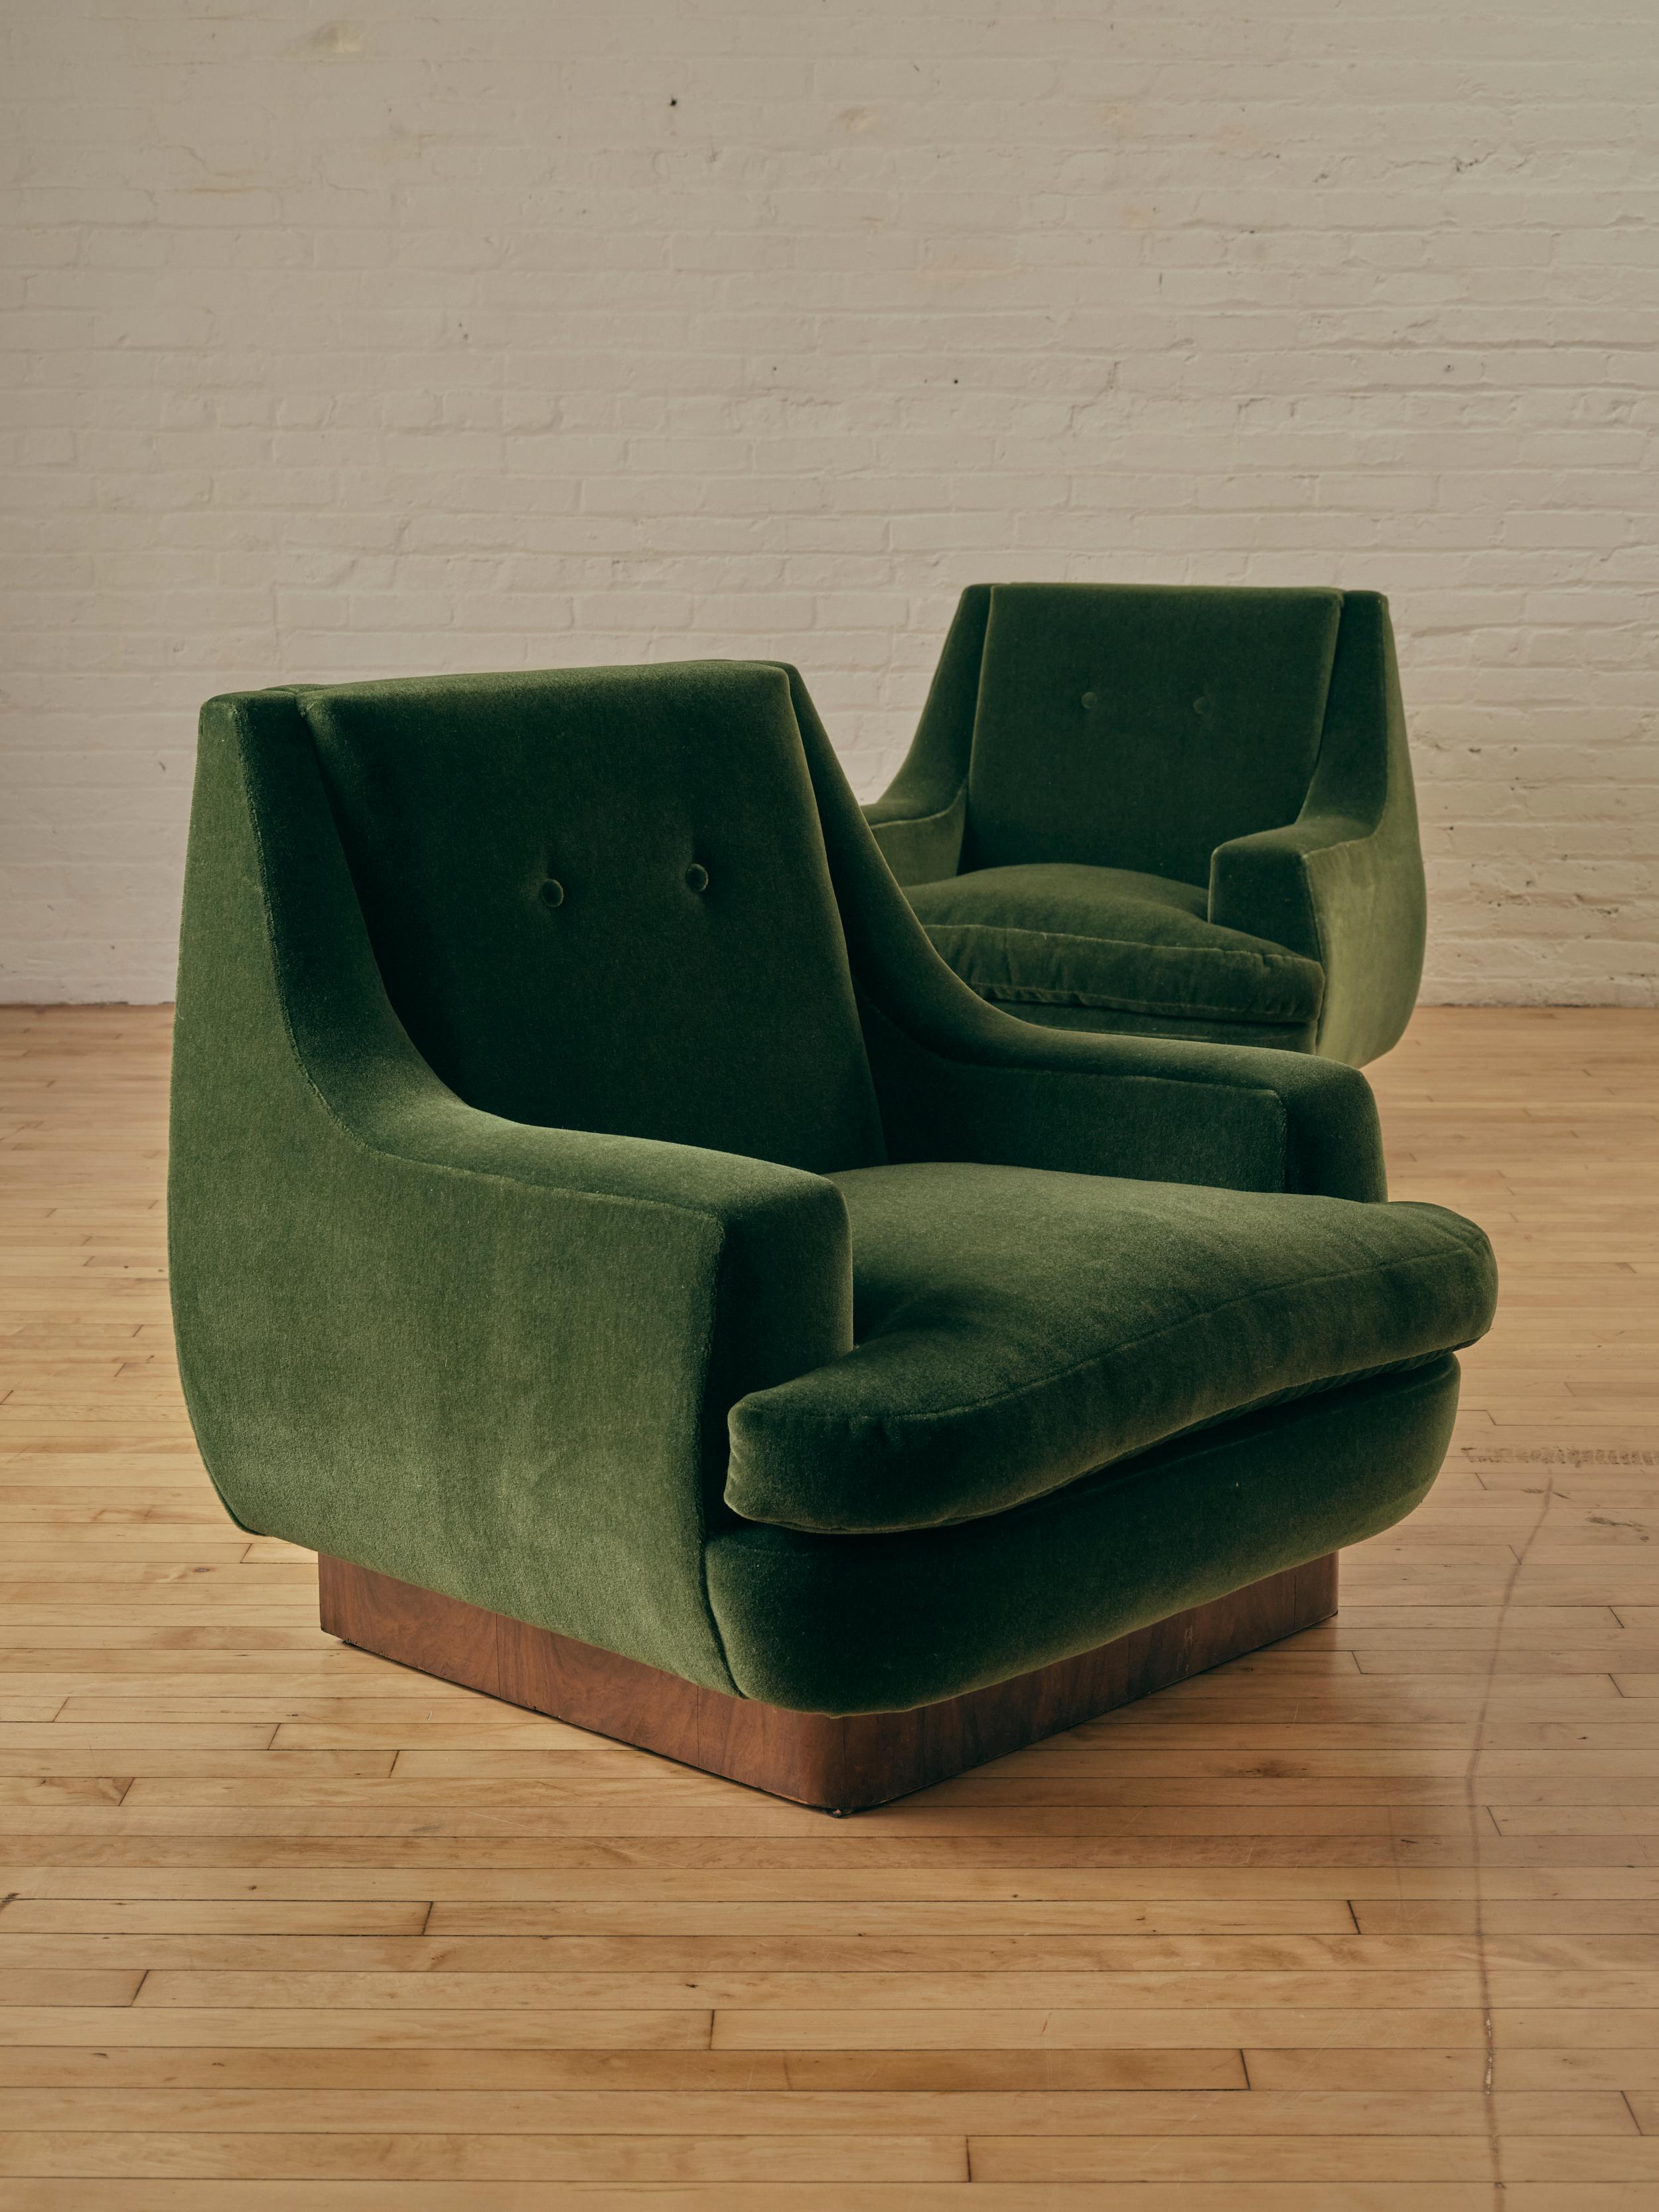 A Pair of Modernist Cube Lounge Chairs reupholstered in Dedar Milano's Vladimiro Mohair in color 25, Verde Bottiglia, sitting atop a rich wooden base. 

